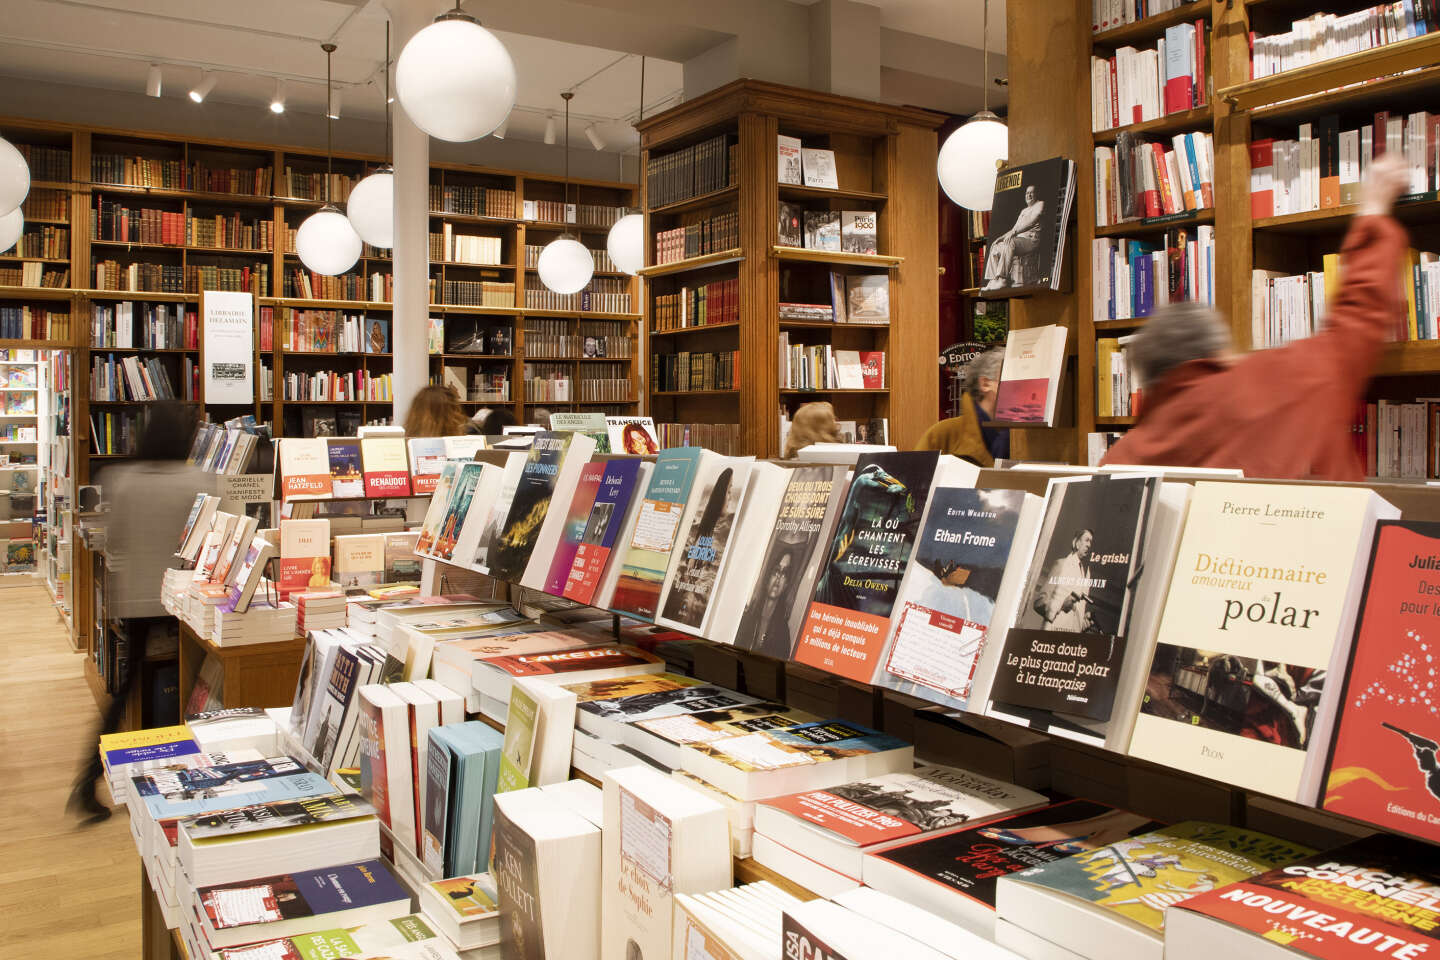 Five amazing bookstores in the heart of Paris - Archyde